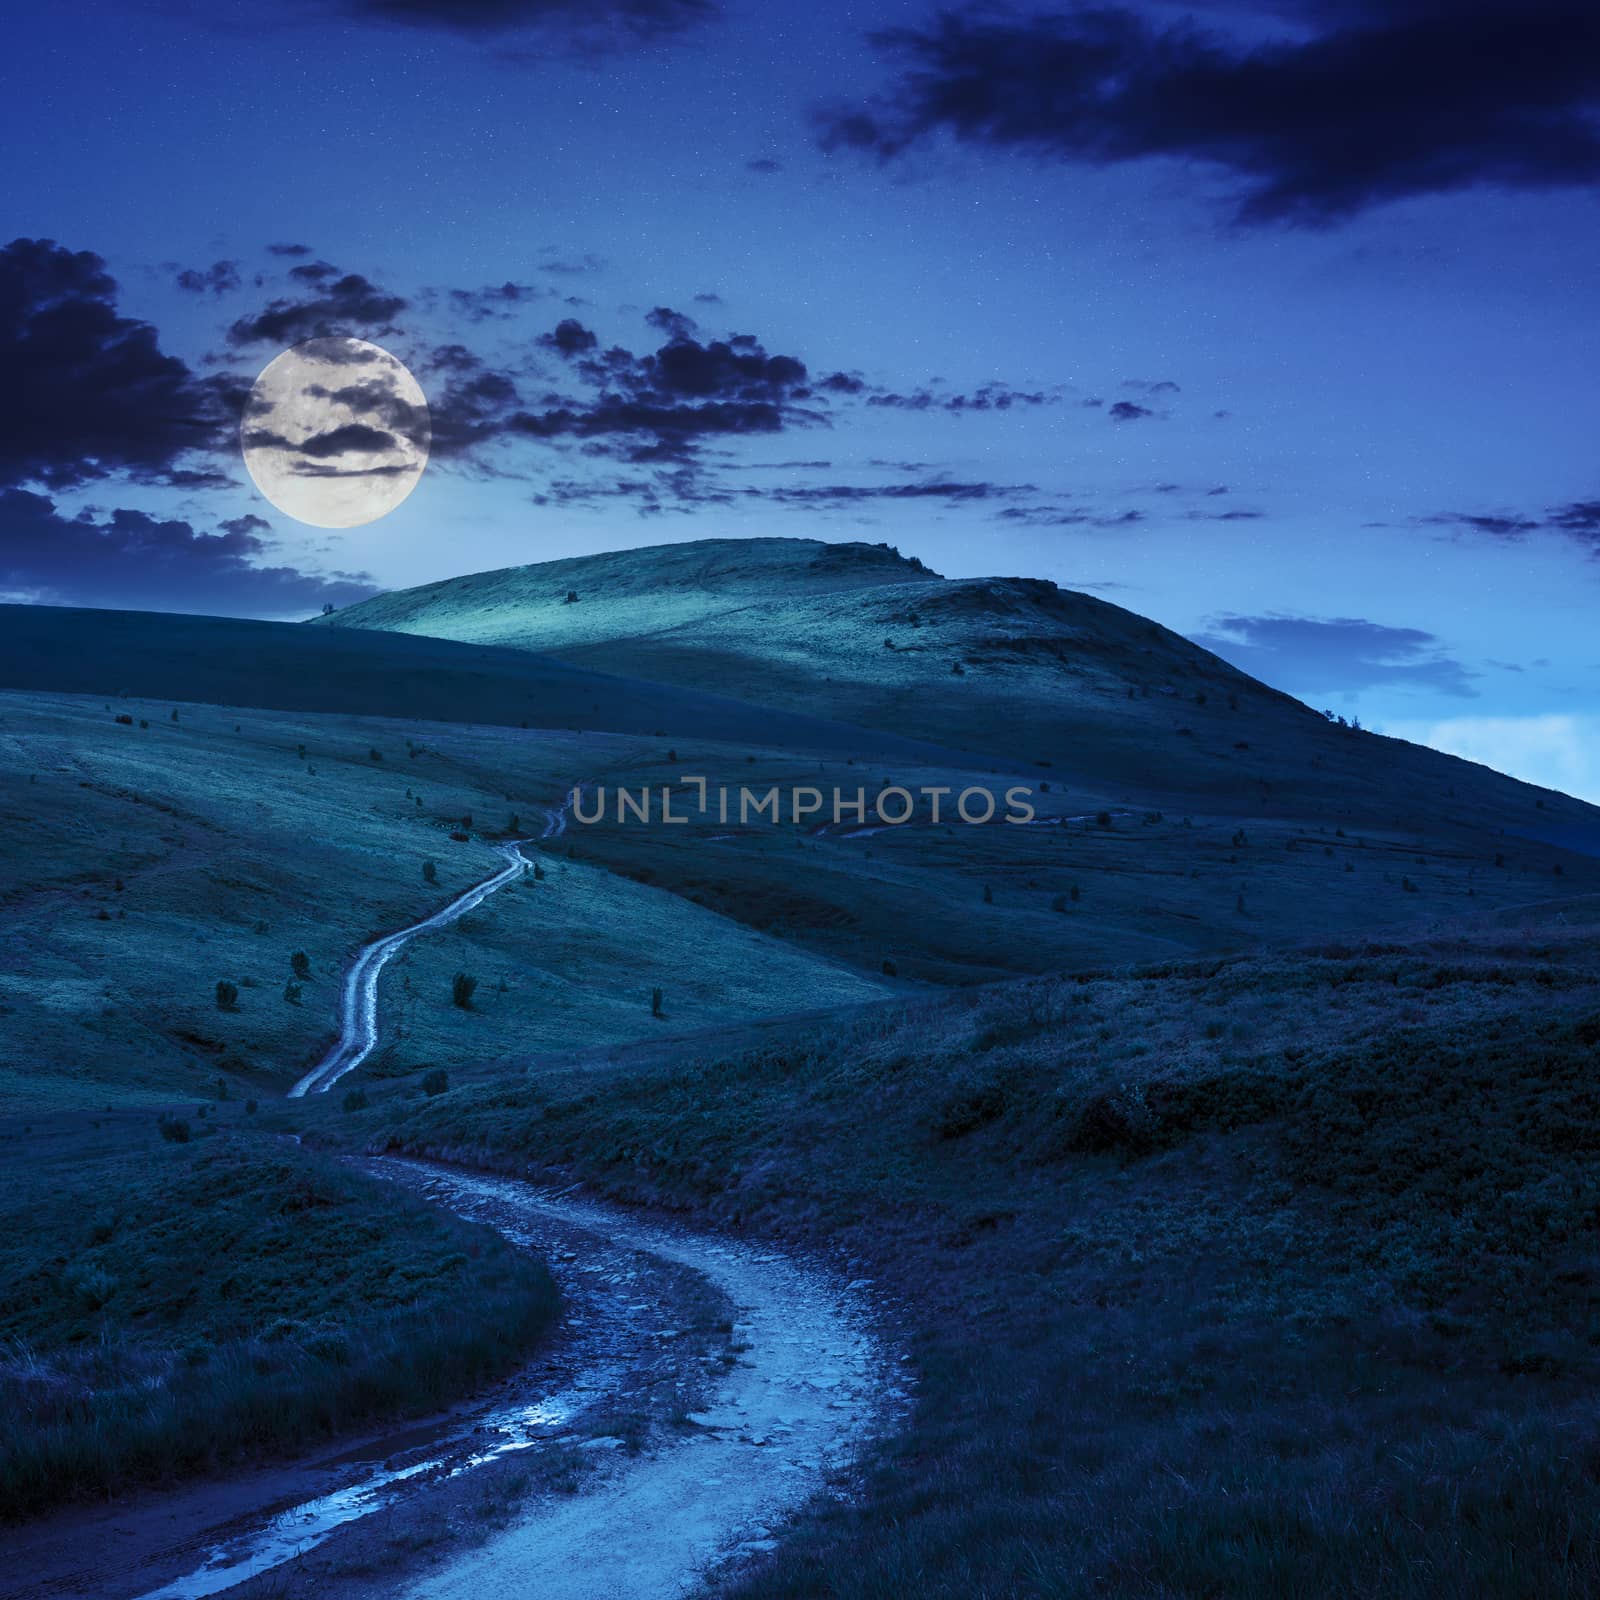 mountain path uphill to the sky at night by Pellinni